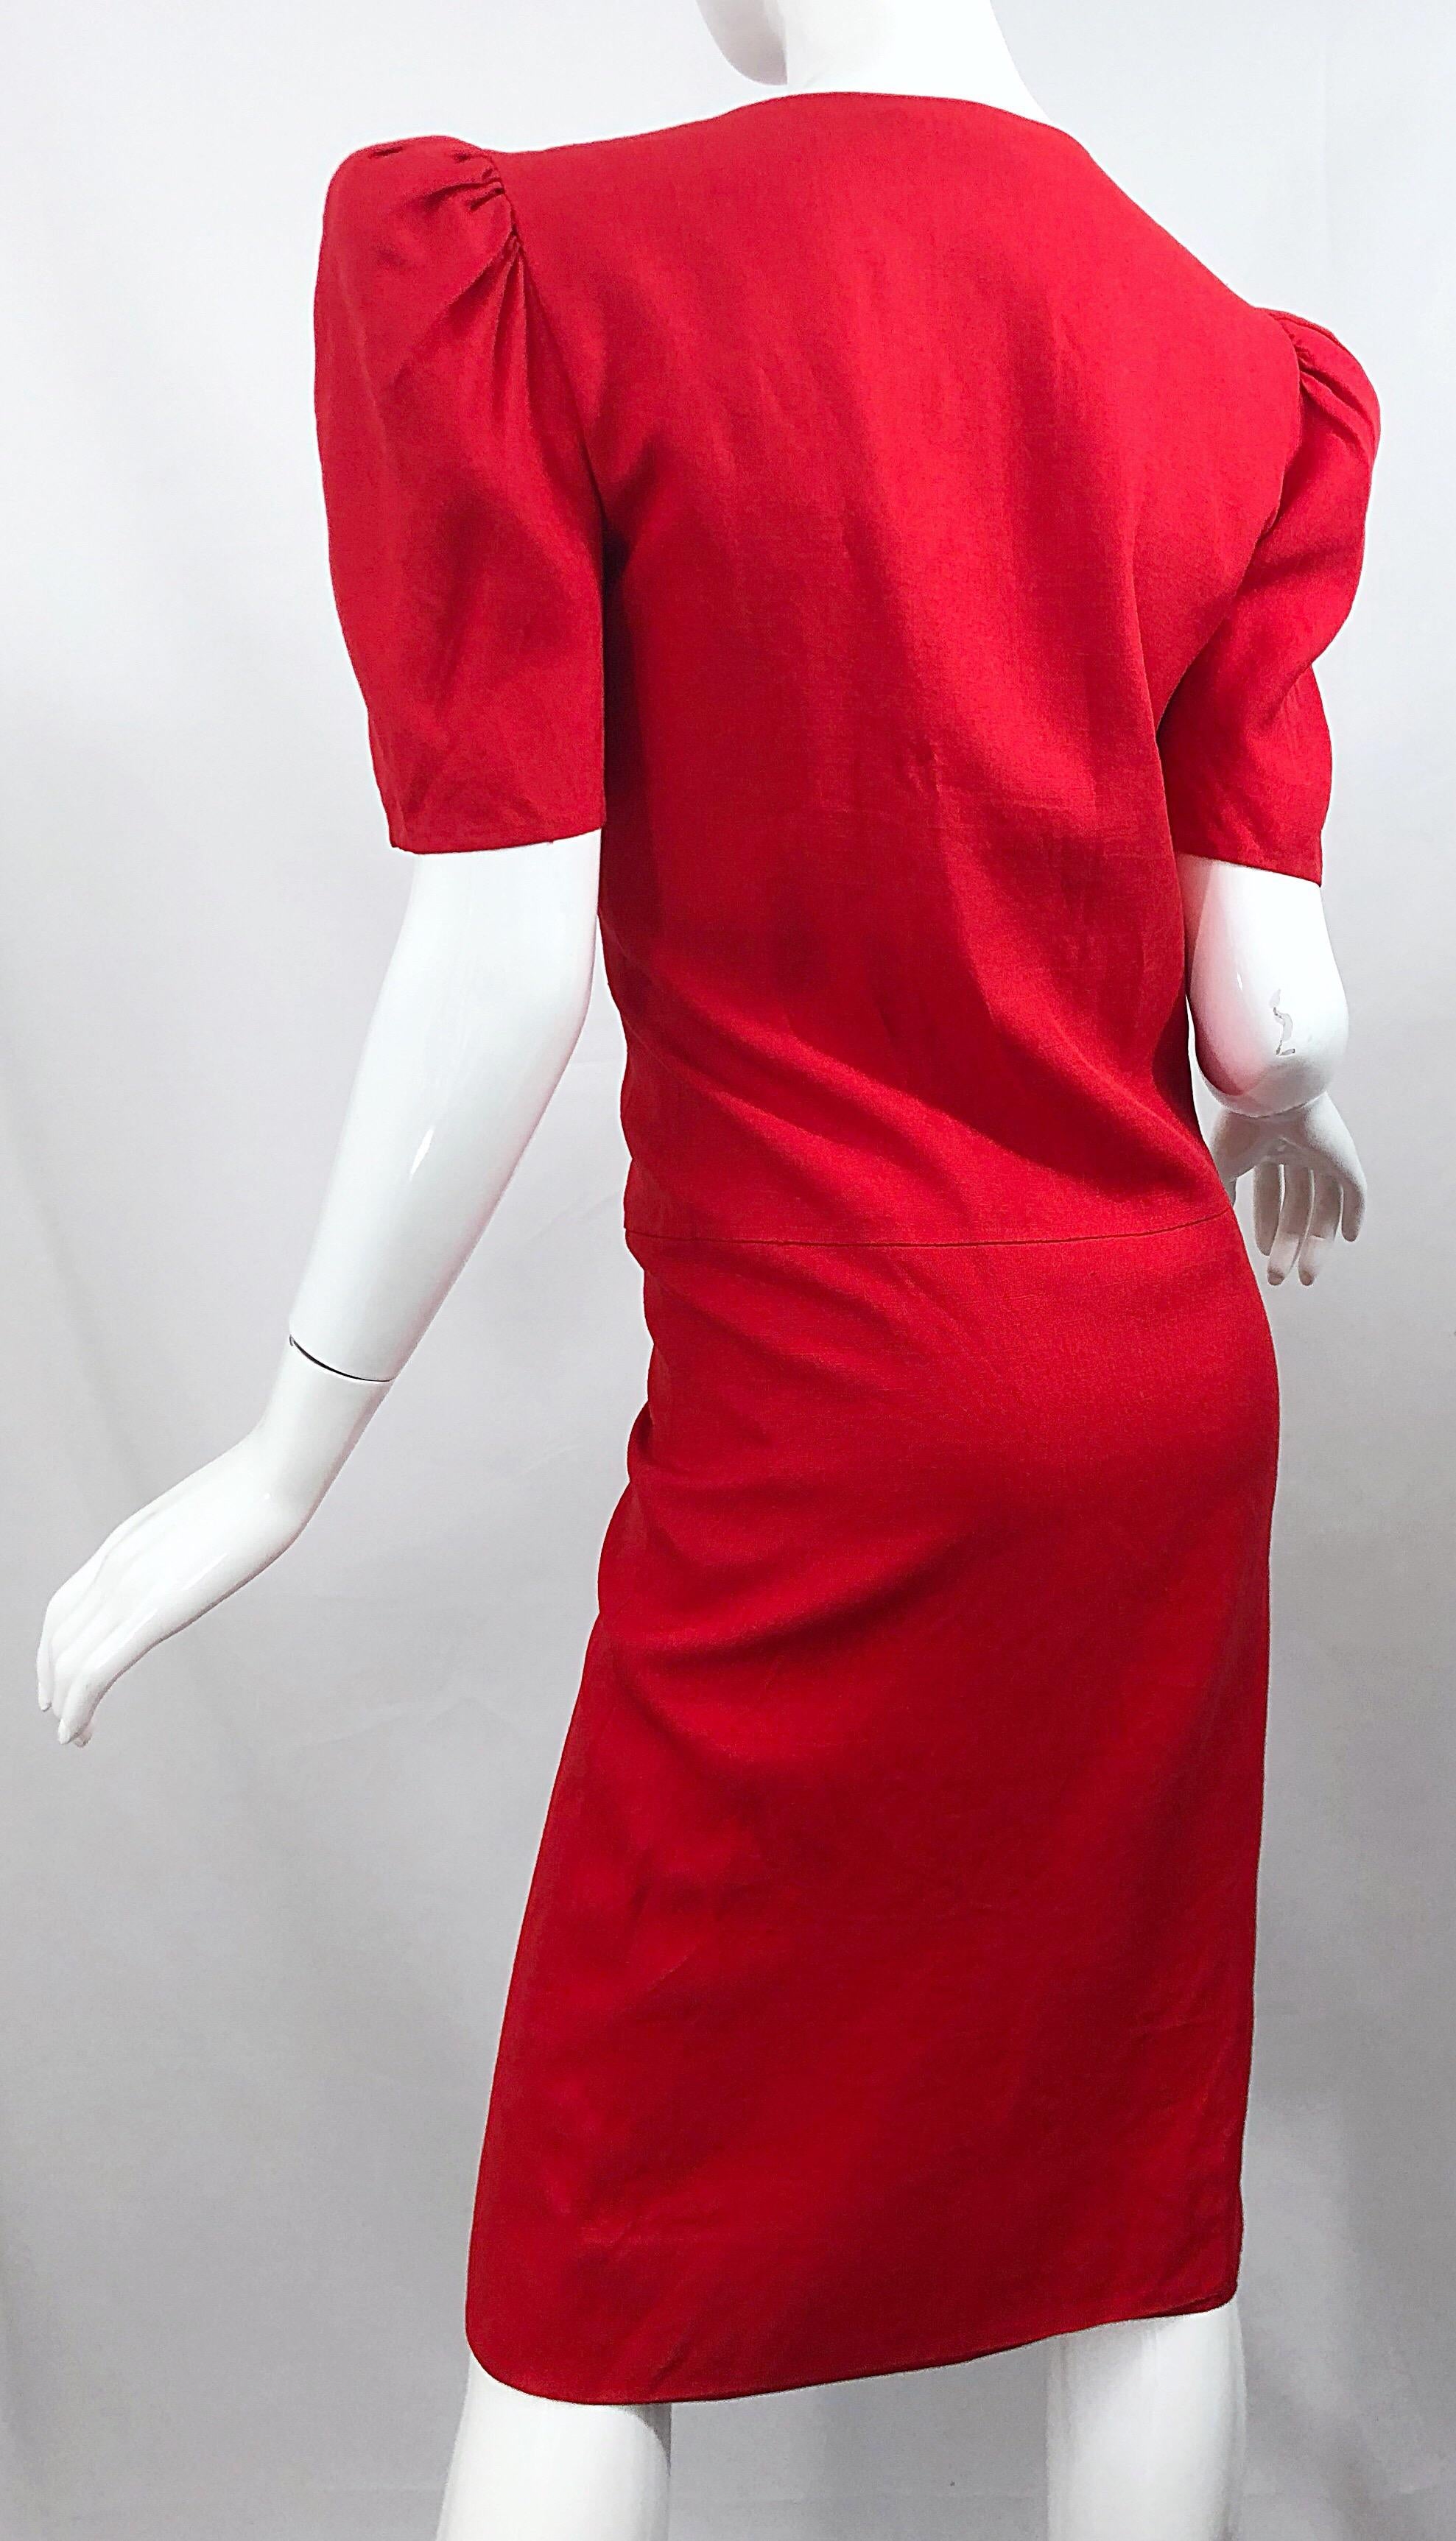 Women's Vintage Adele Simpson I Magnin 1980s Size 10 Lipstick Red Linen Rayon 90s Dress For Sale